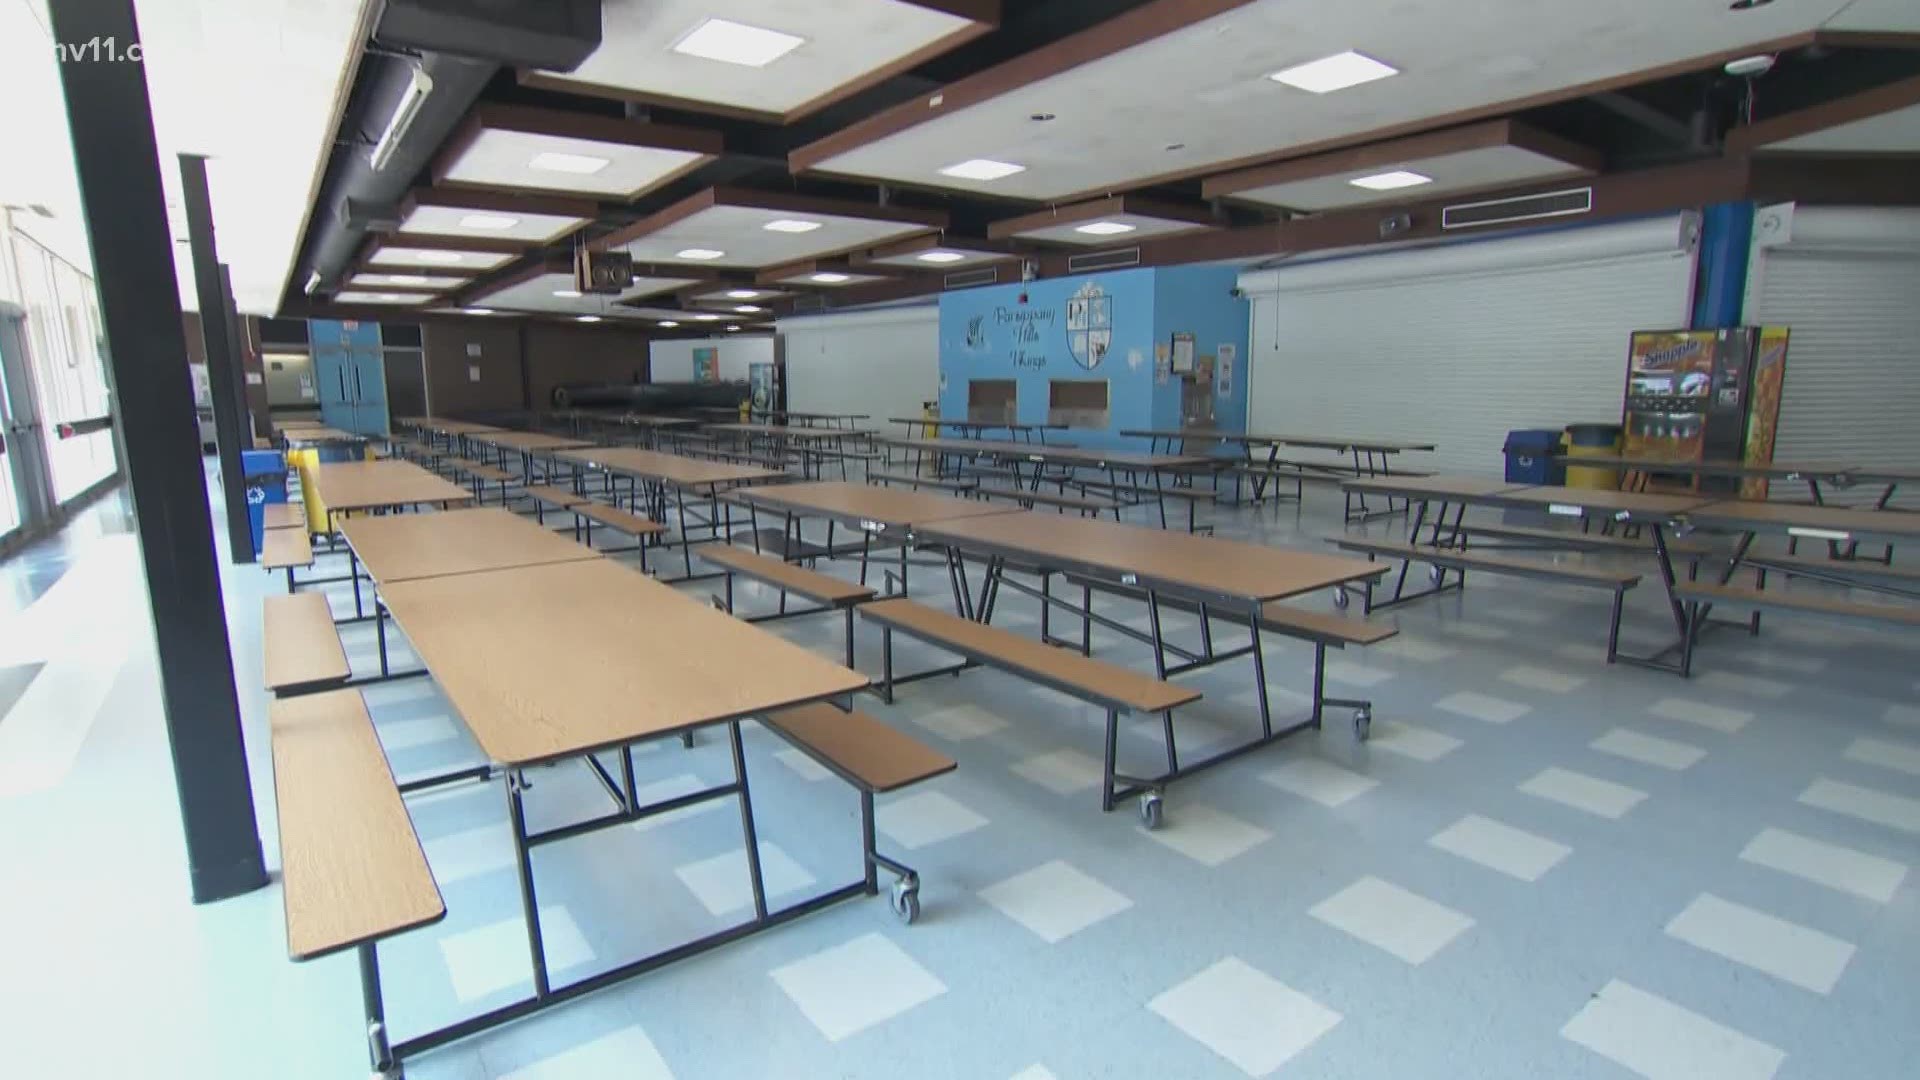 Twenty days from the reopening date, the governor reiterated schools will open this fall, even as superintendents continue to raise questions.